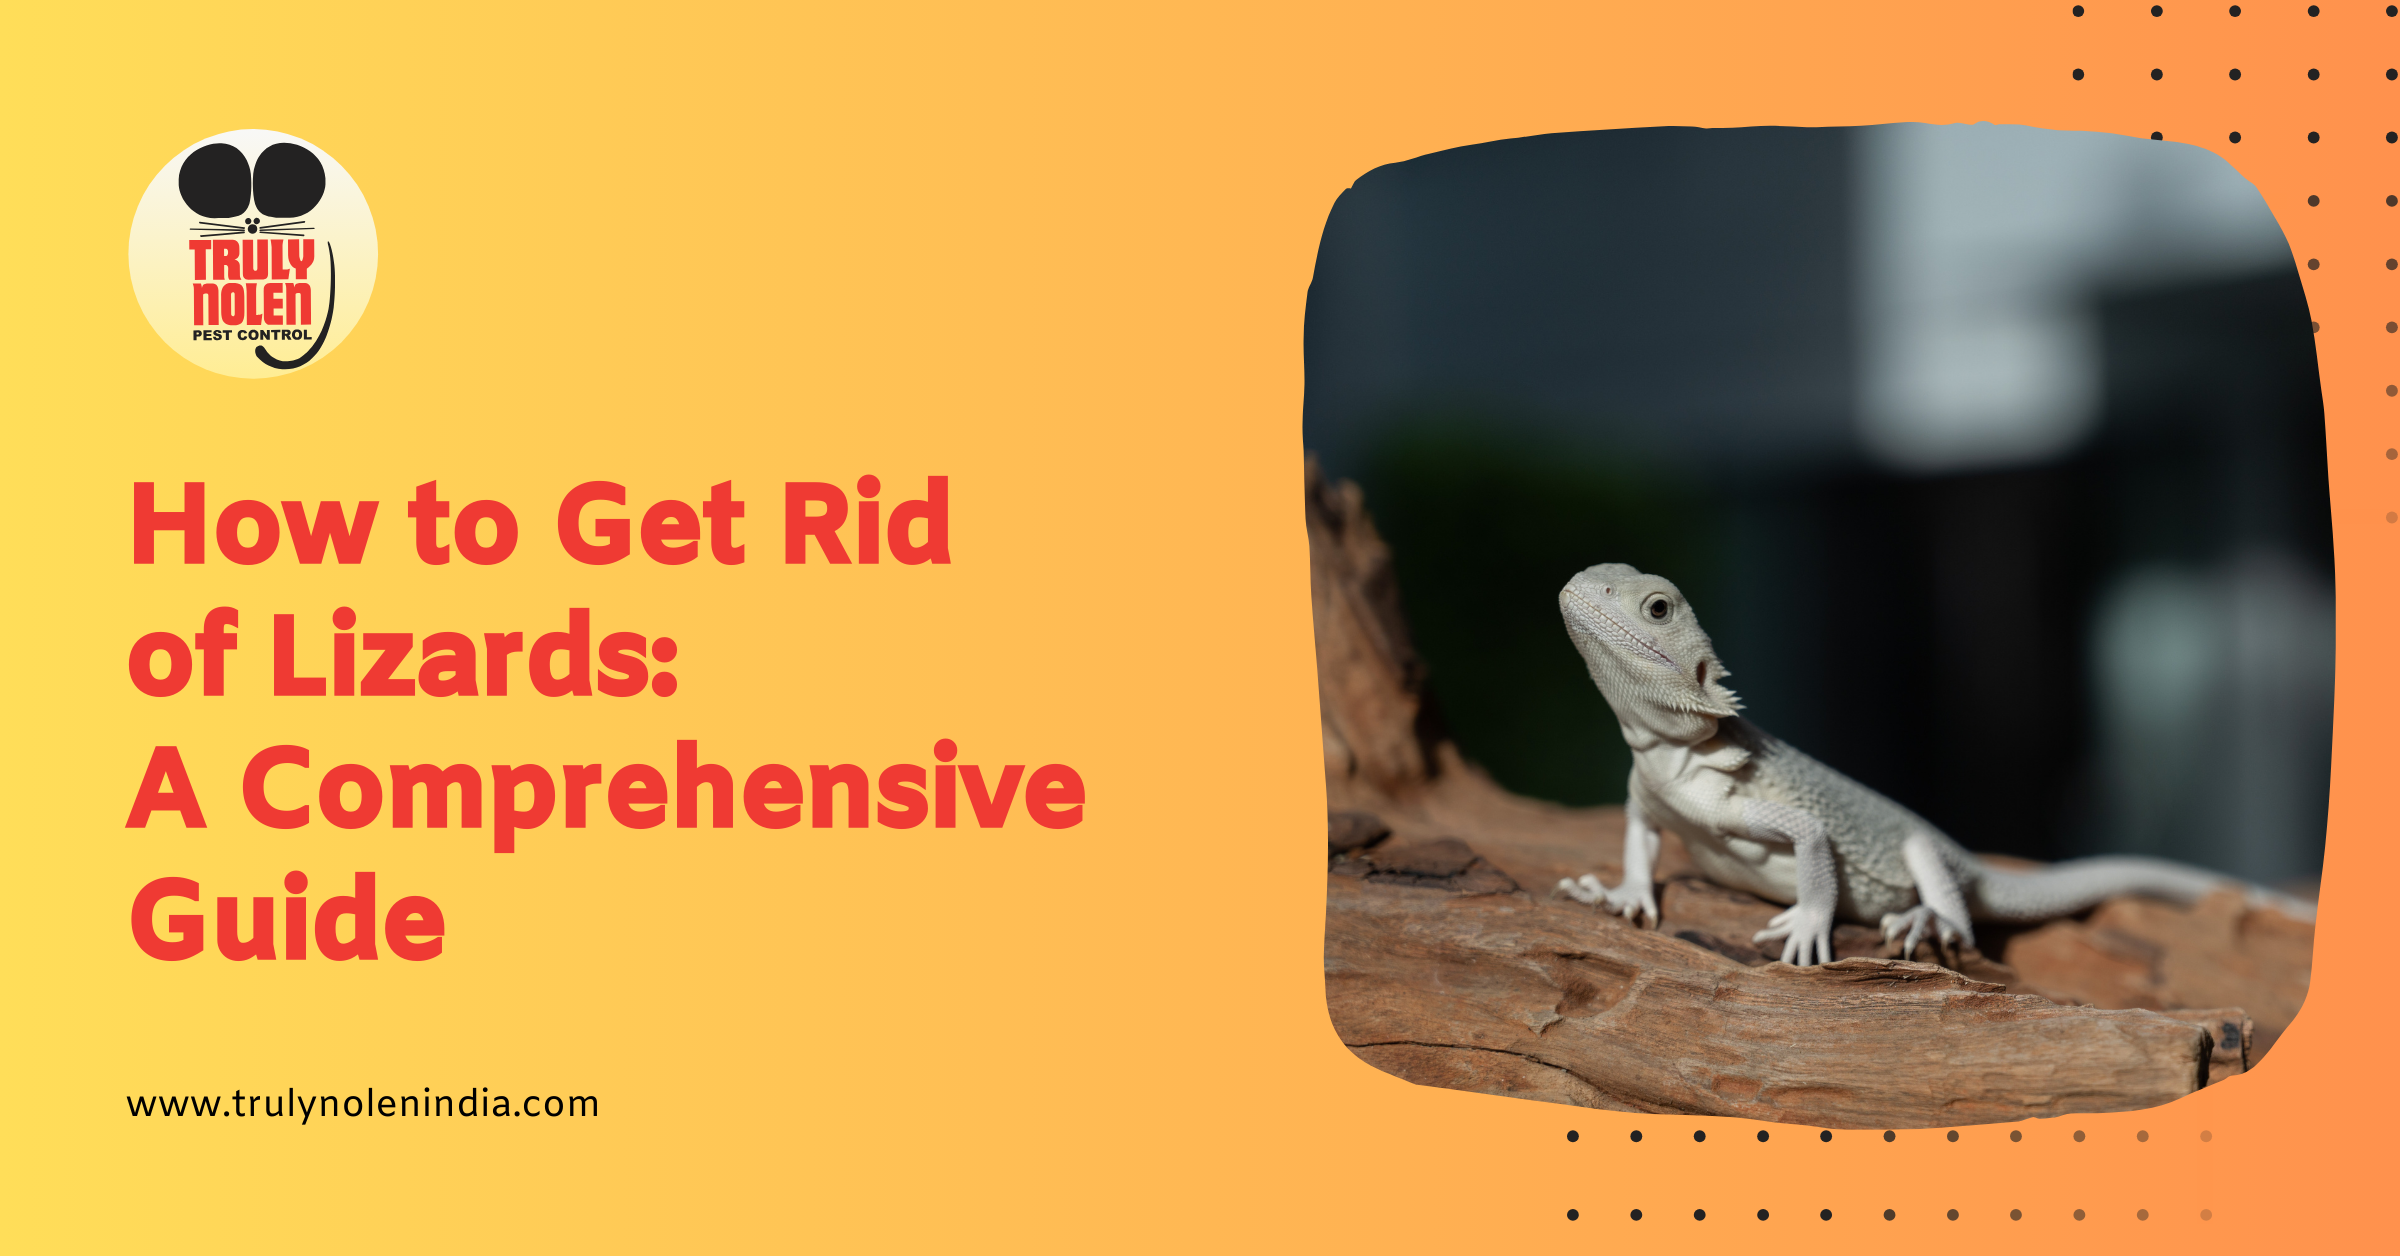 How to Get Rid of Lizards: A Comprehensive Guide